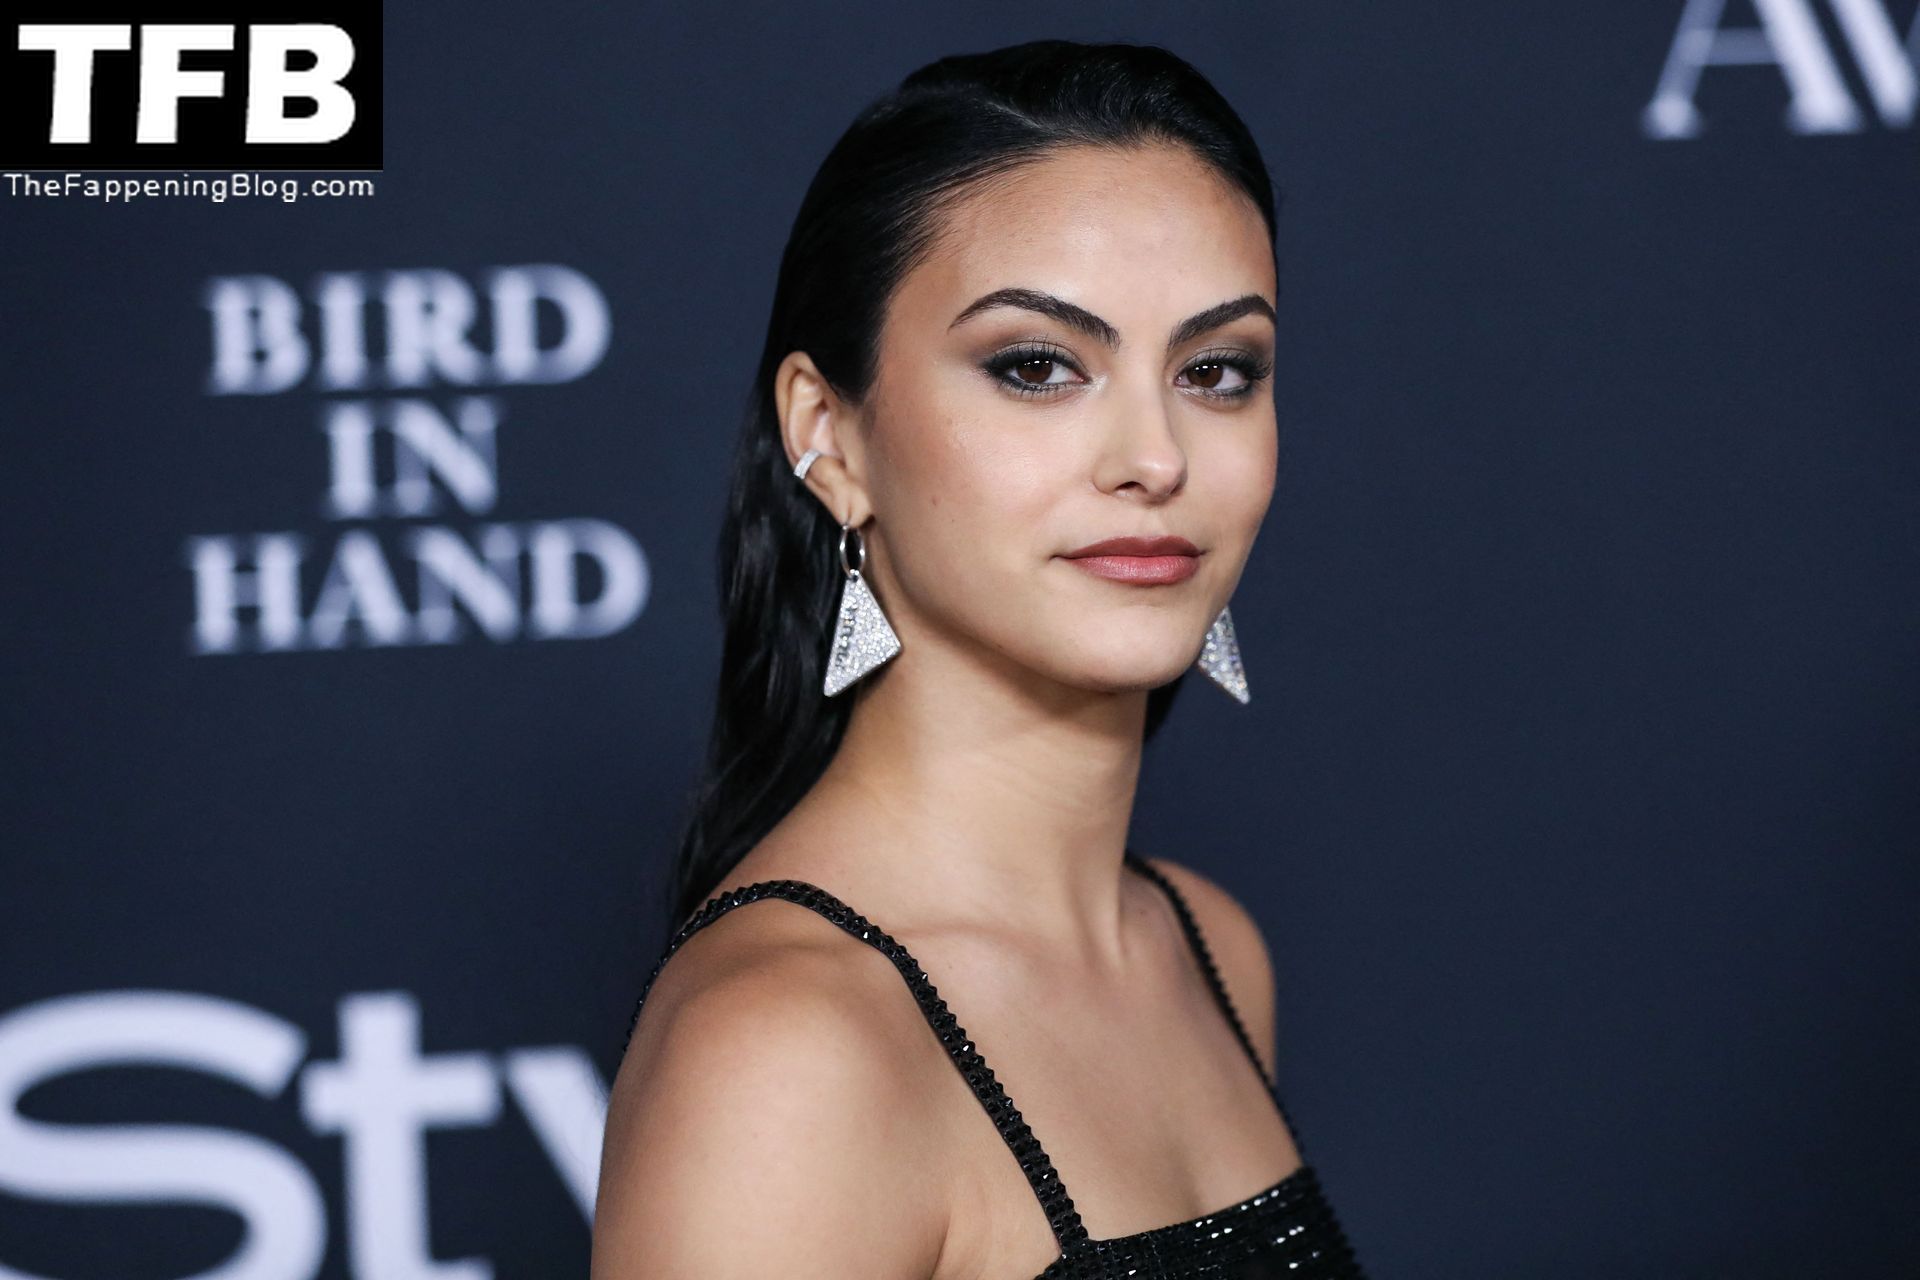 Camila-Mendes-See-Through-Tits-The-Fappening-Blog-24.jpg